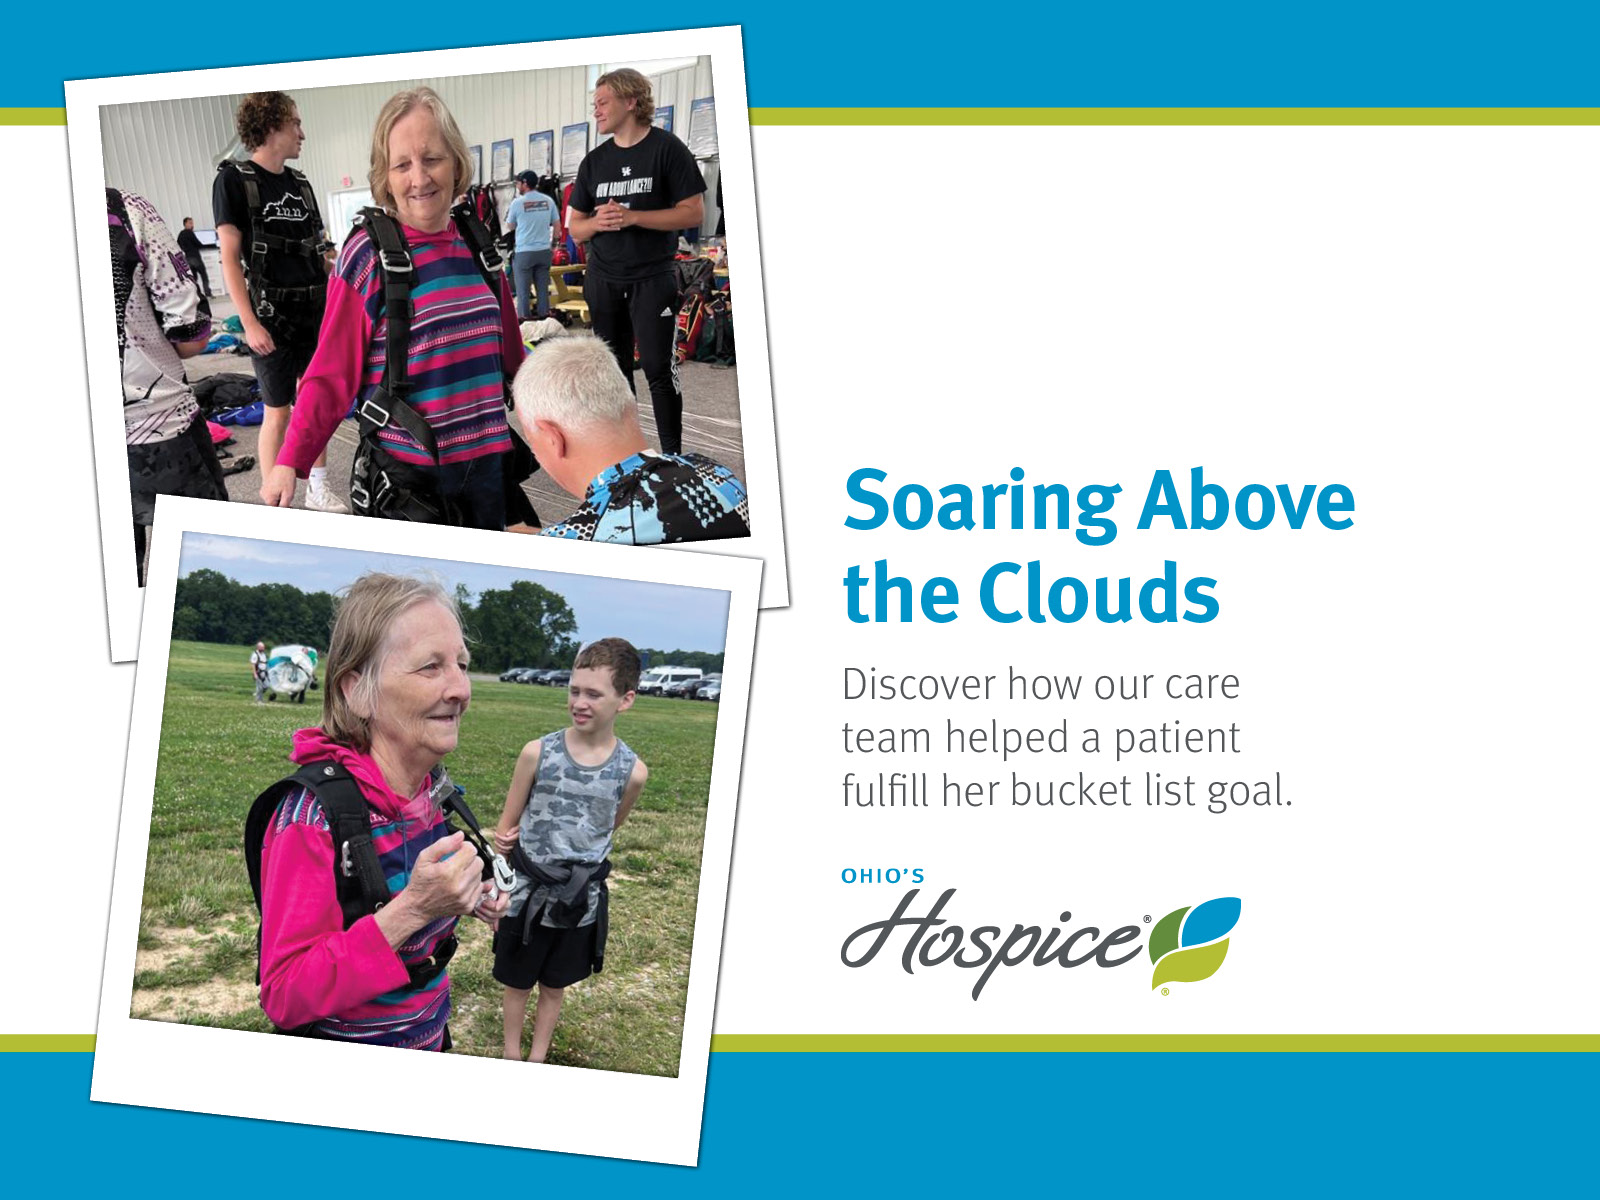 Soaring Above the Clouds. Discover how our care team helped a patient fulfill her bucket list goal. Ohio's Hospice.